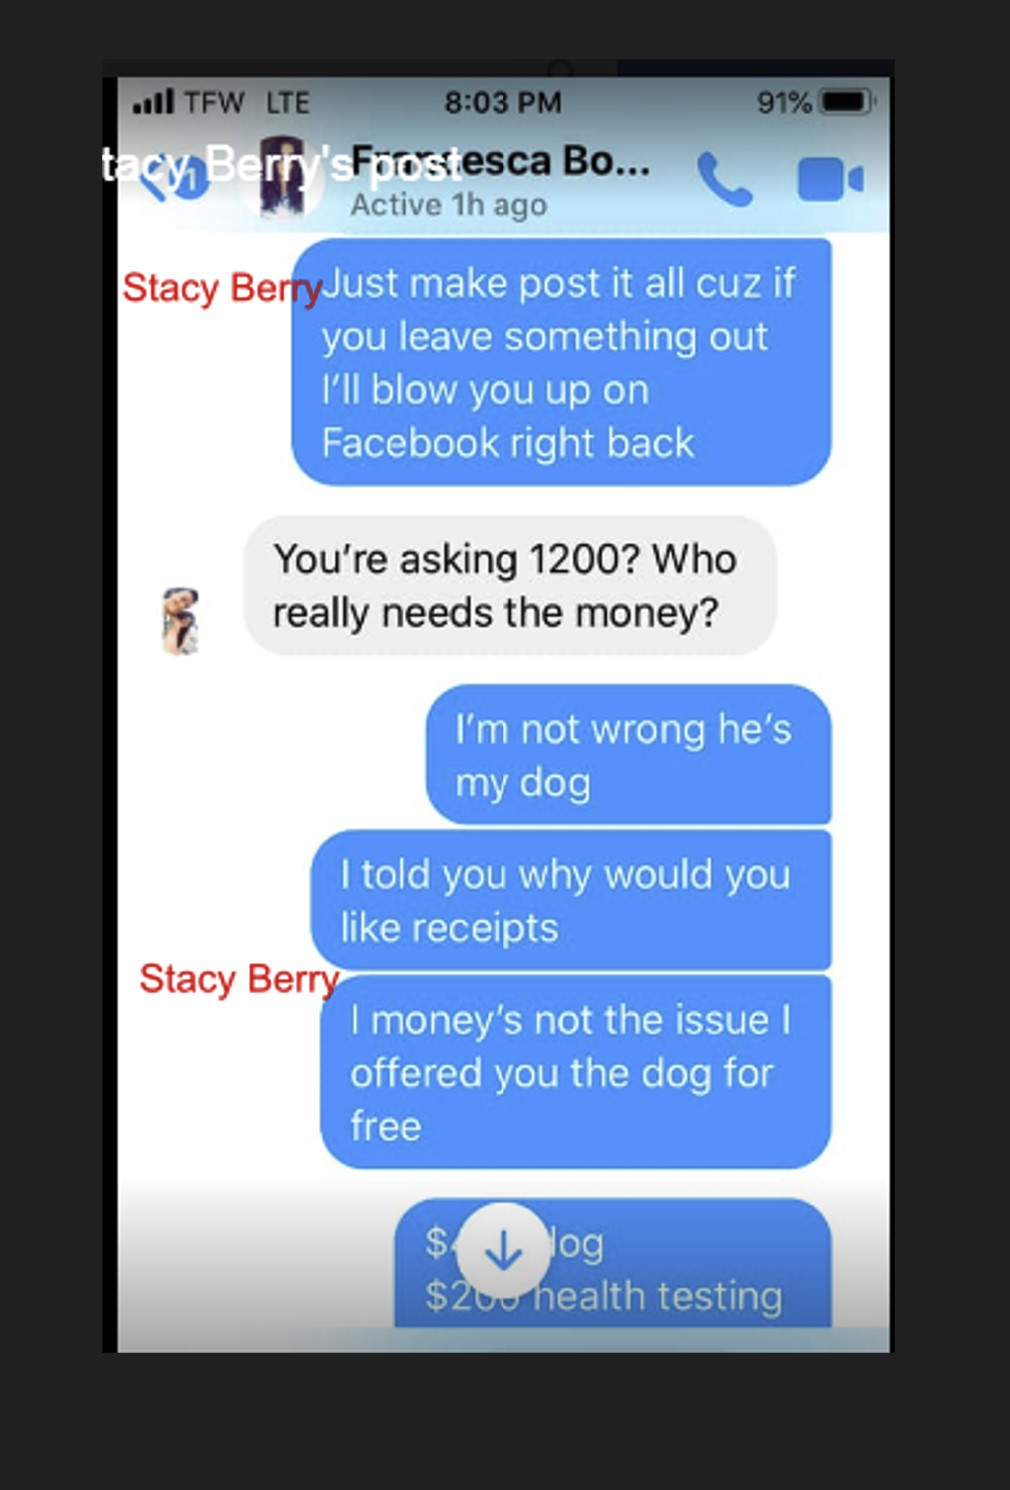 Stacy Berry's text in blue